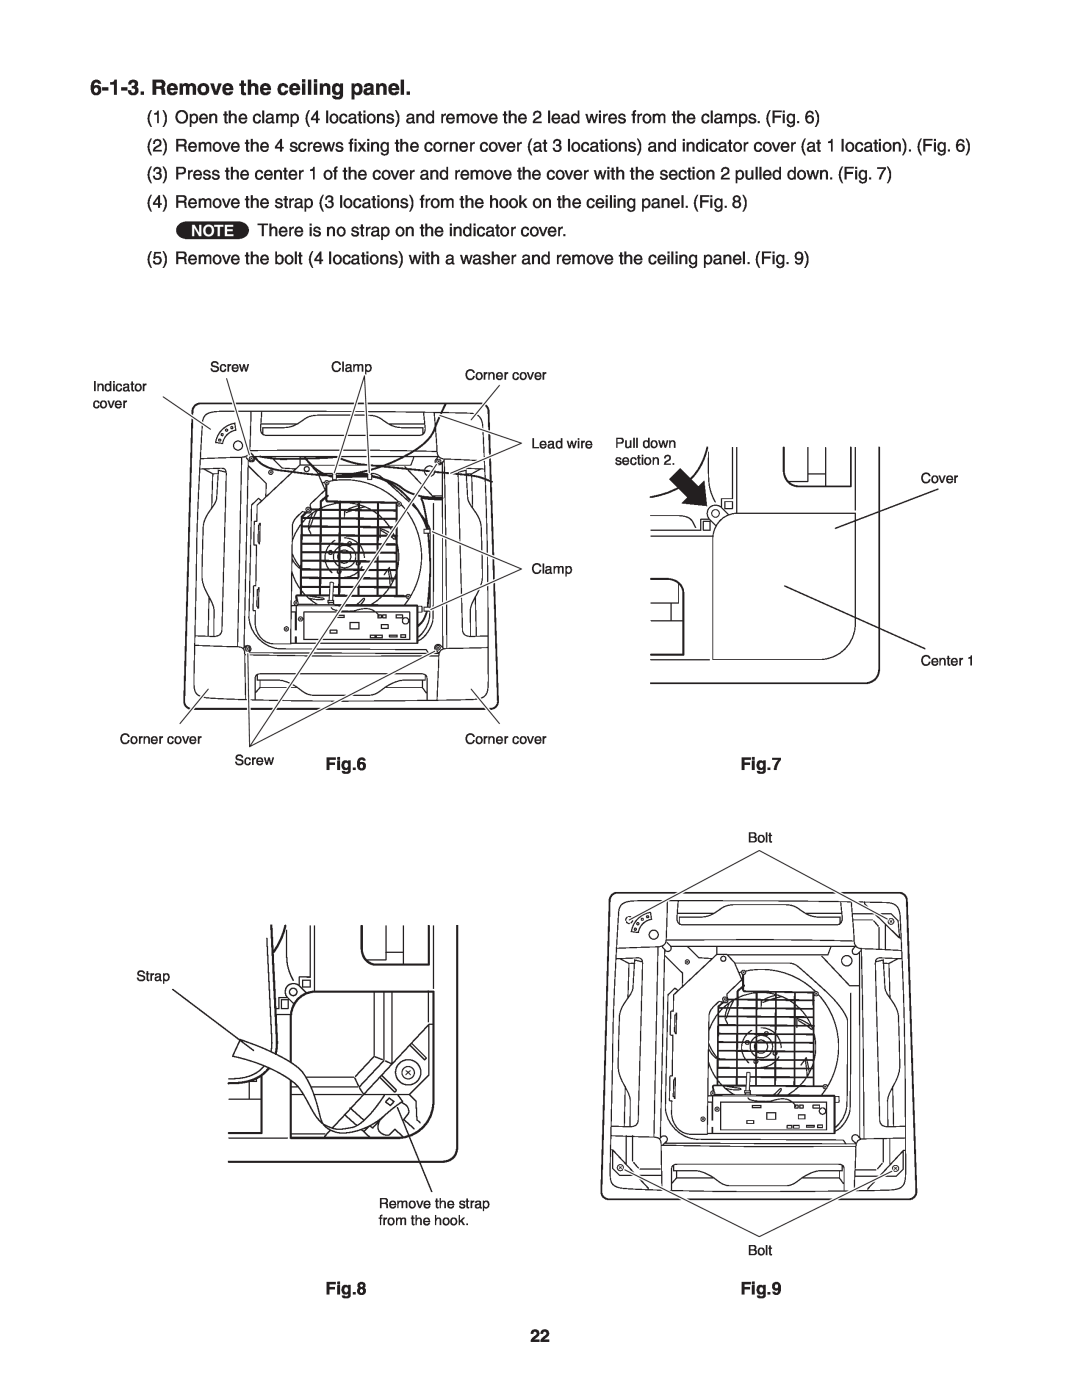 Panasonic R410A service manual Remove the ceiling panel 